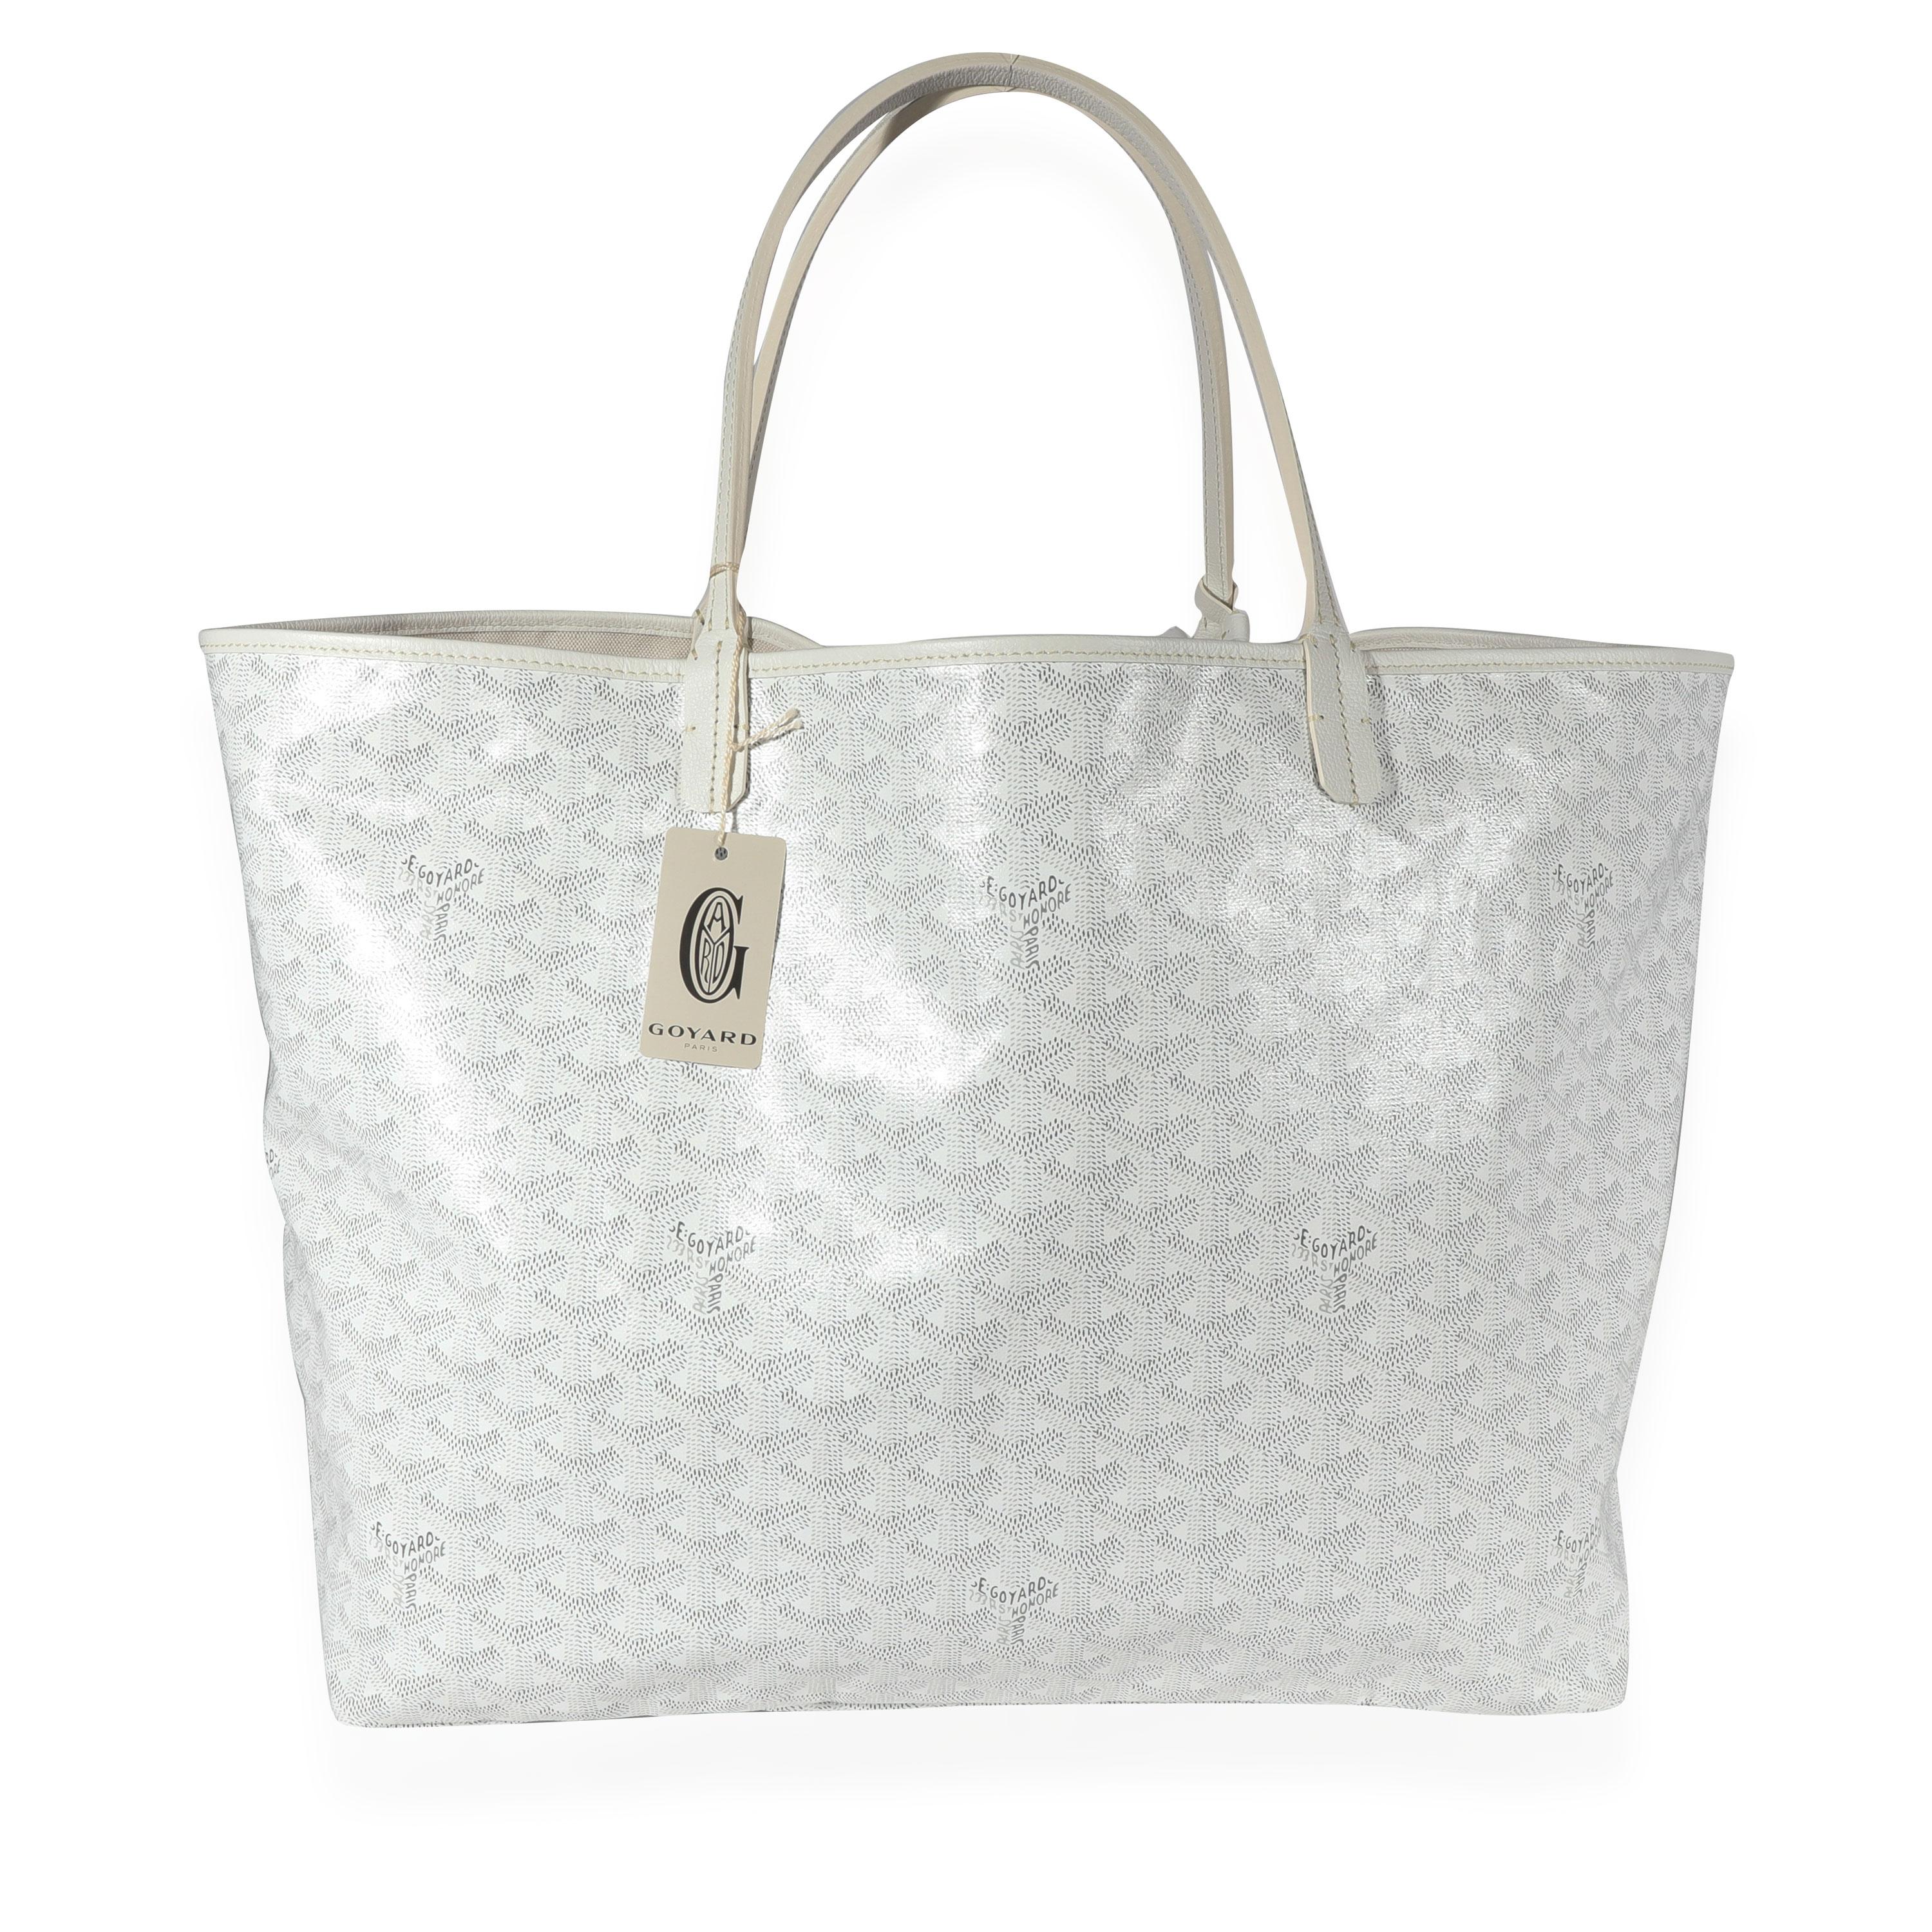 Listing Title: Goyard White Goyardine Canvas Saint Louis GM Tote
SKU: 122219
Condition: Pre-owned 
Handbag Condition: Excellent
Condition Comments: Excellent Condition. Faint scratching at hardware. No other visible signs of wear.
Brand: